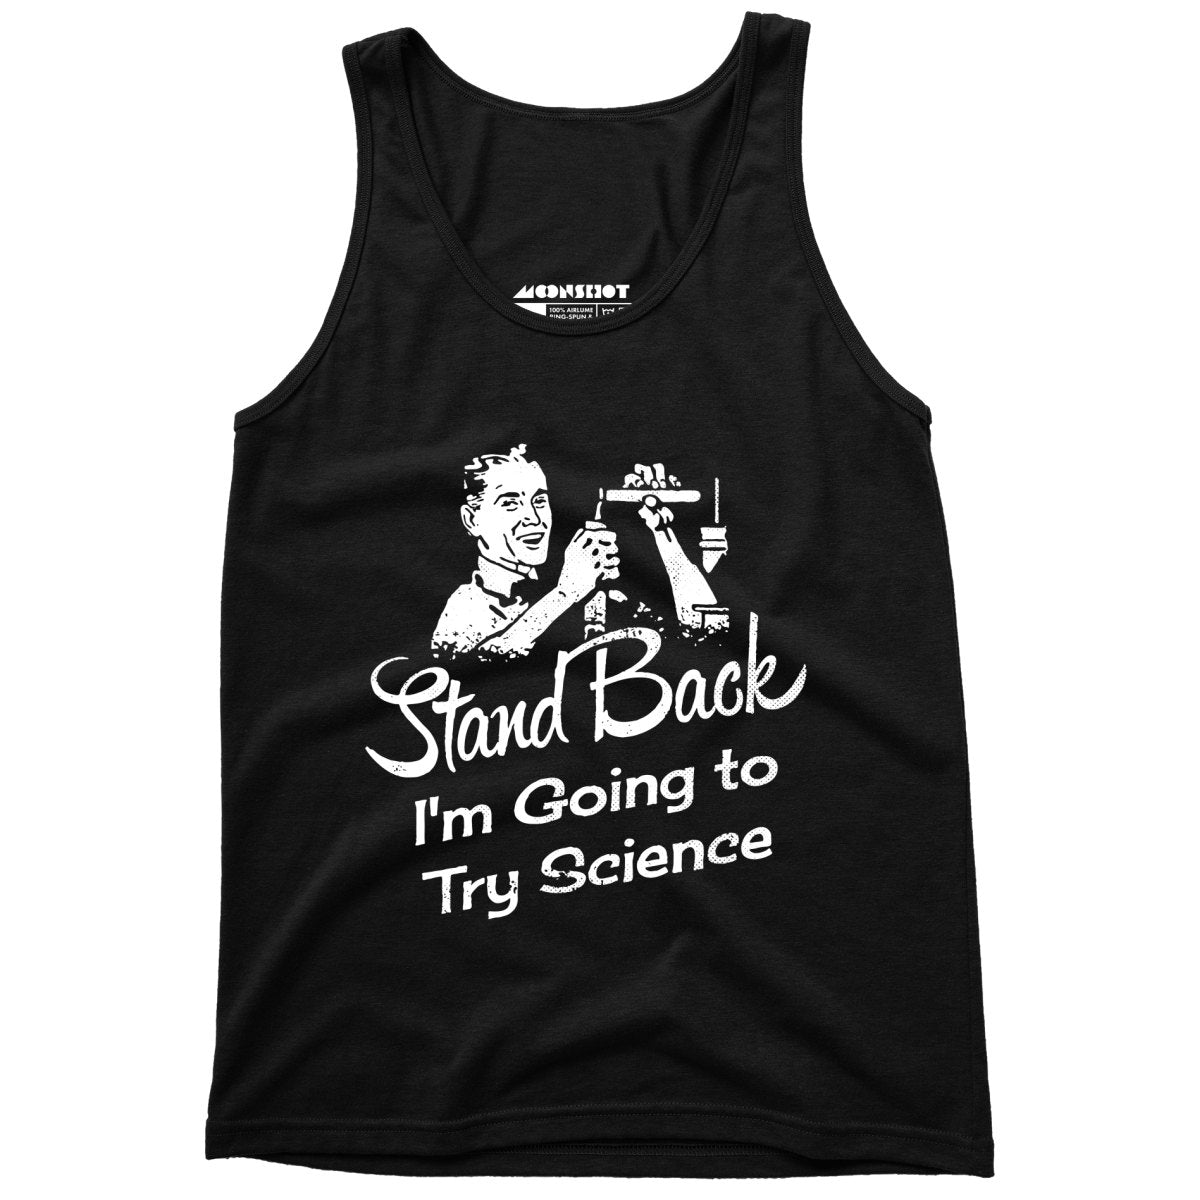 Stand Back I'm Going to Try Science - Unisex Tank Top